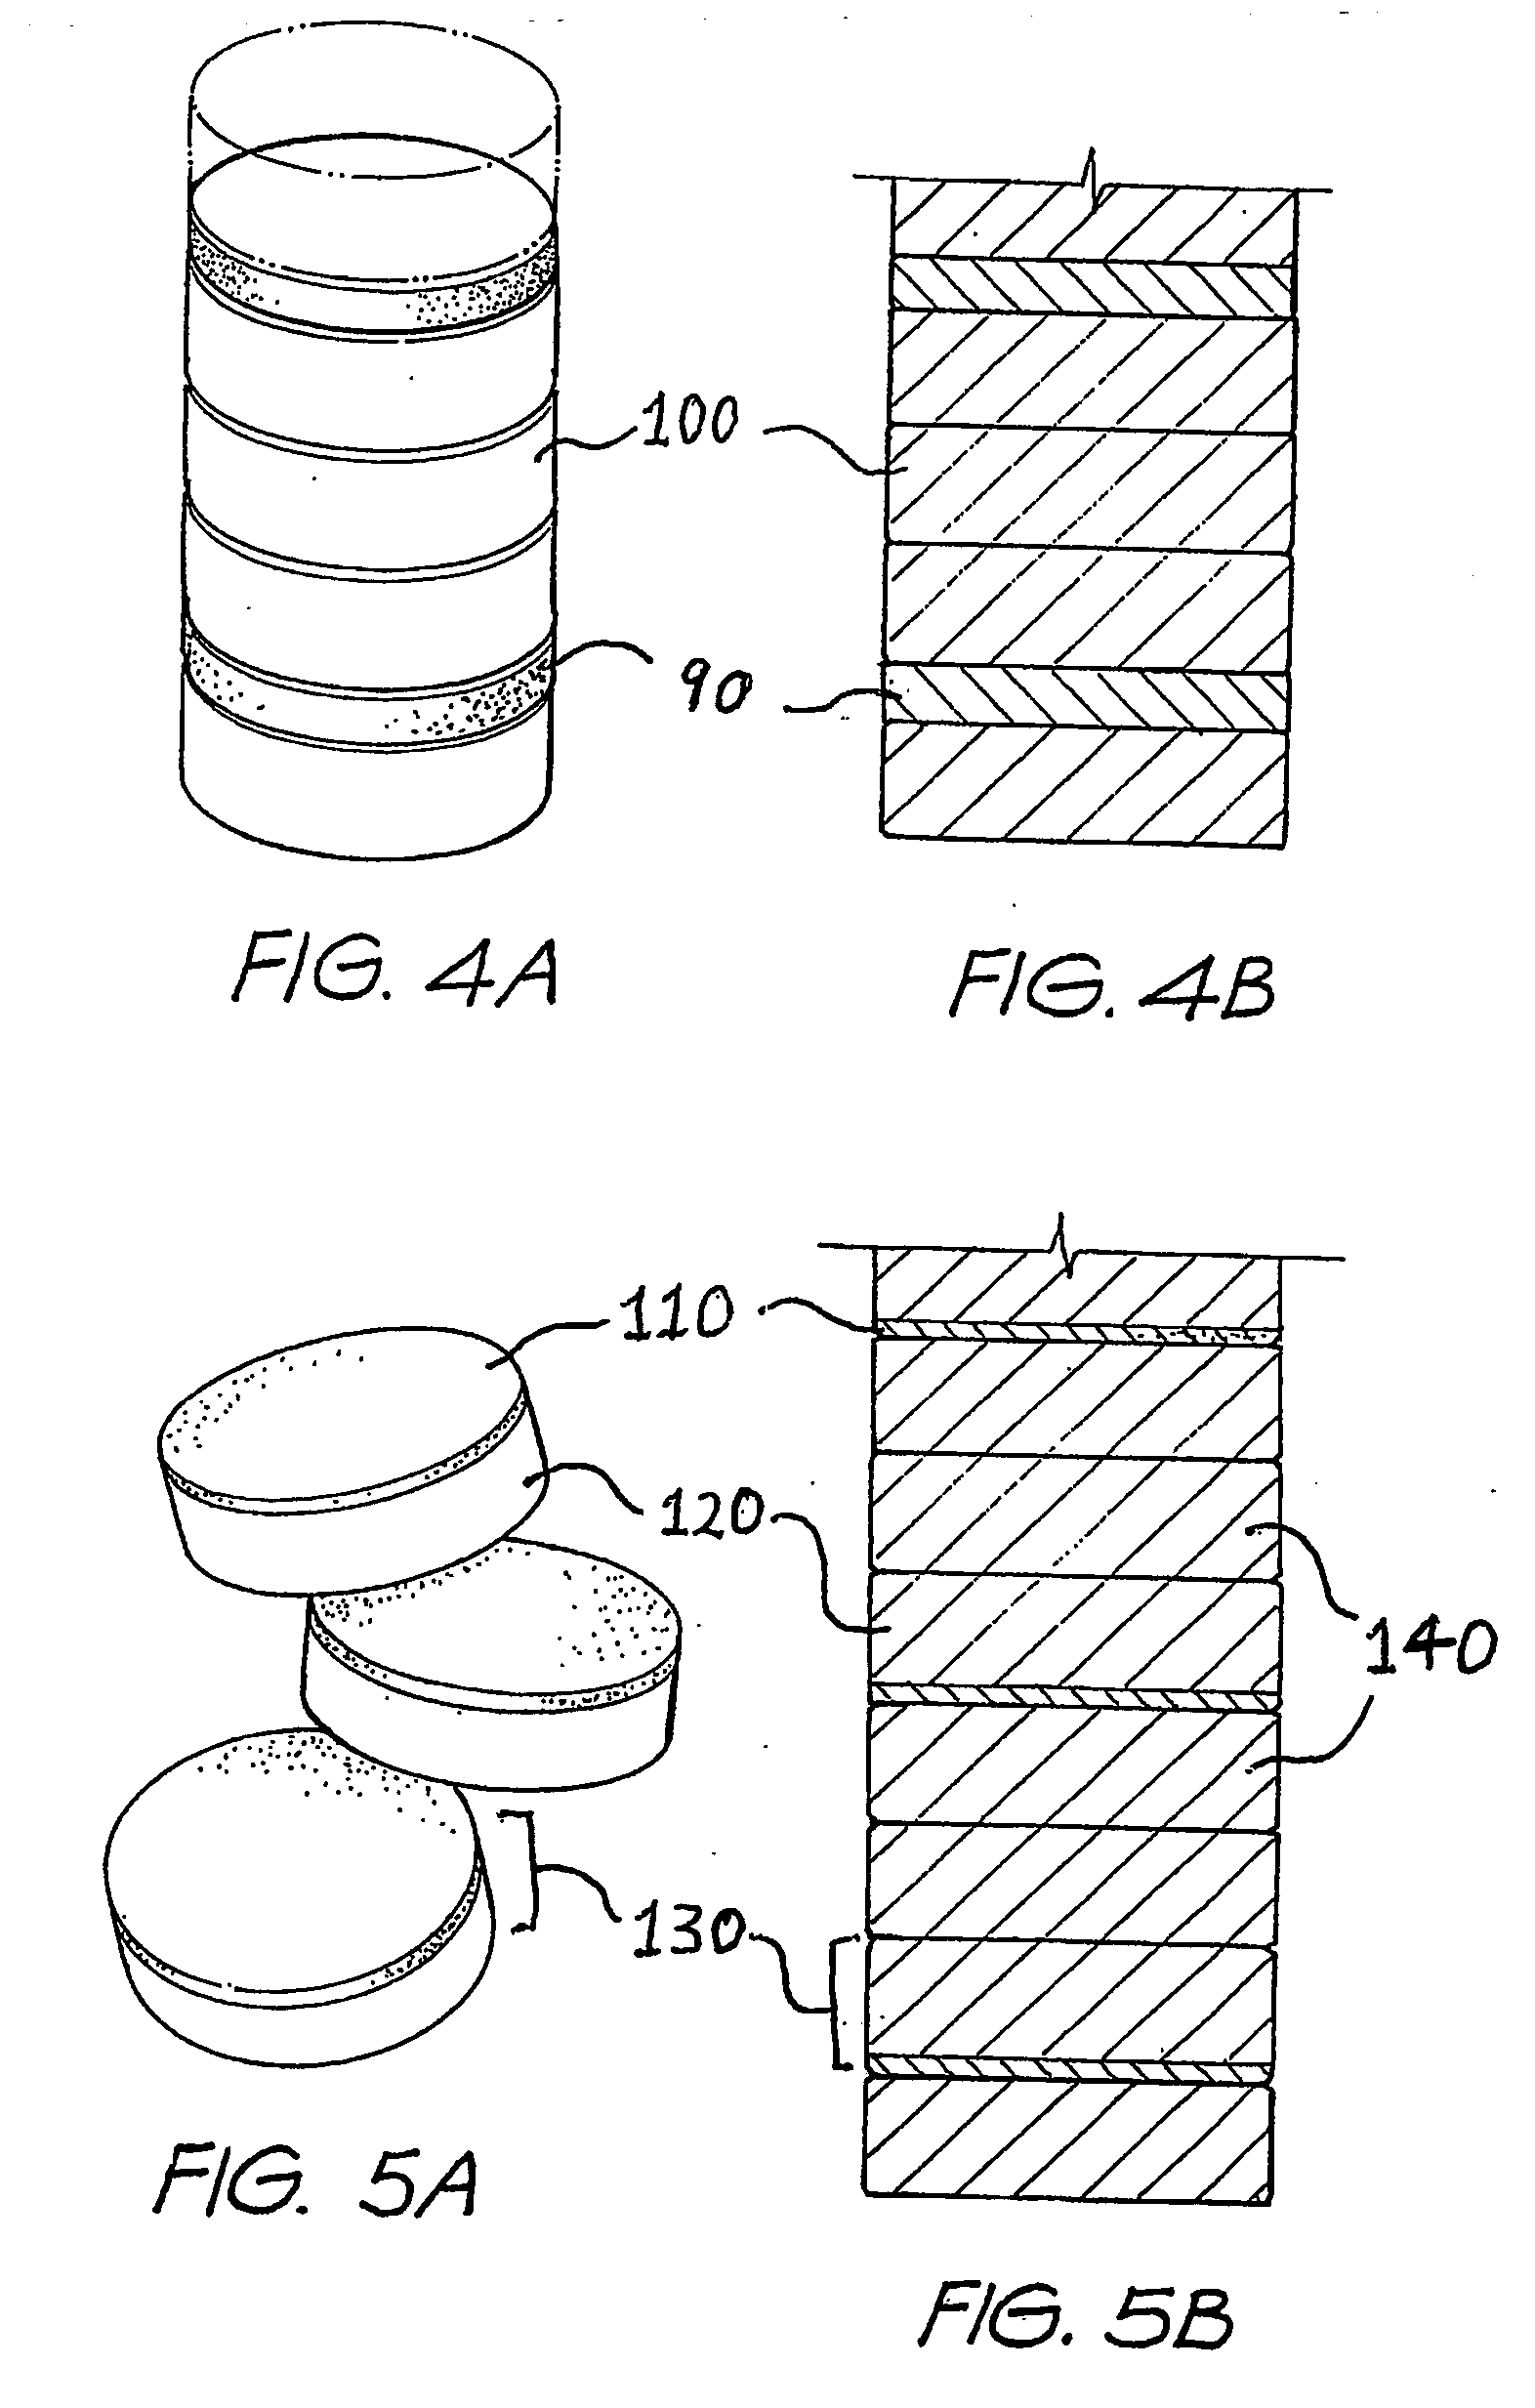 Dosage form, device, and methods of treatment